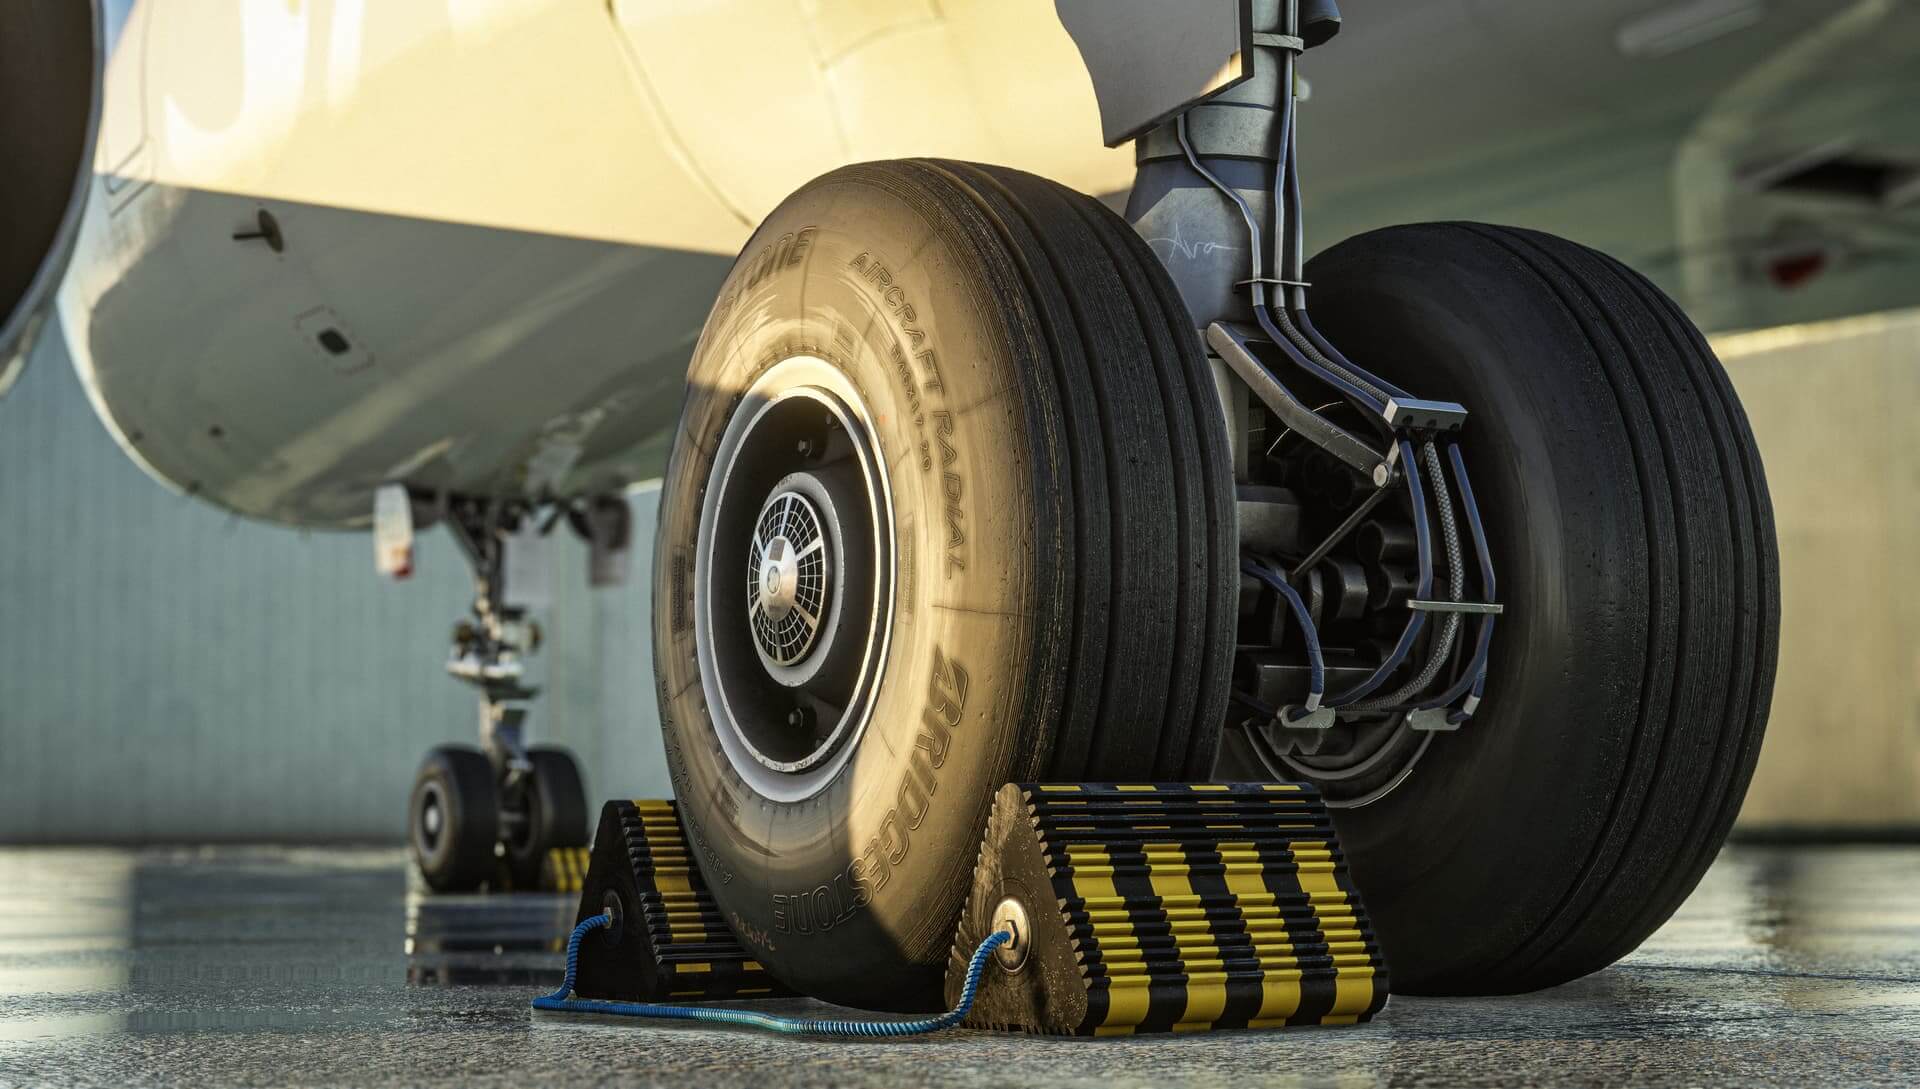 A close up shot of an airliners landing gear with chocks in place.